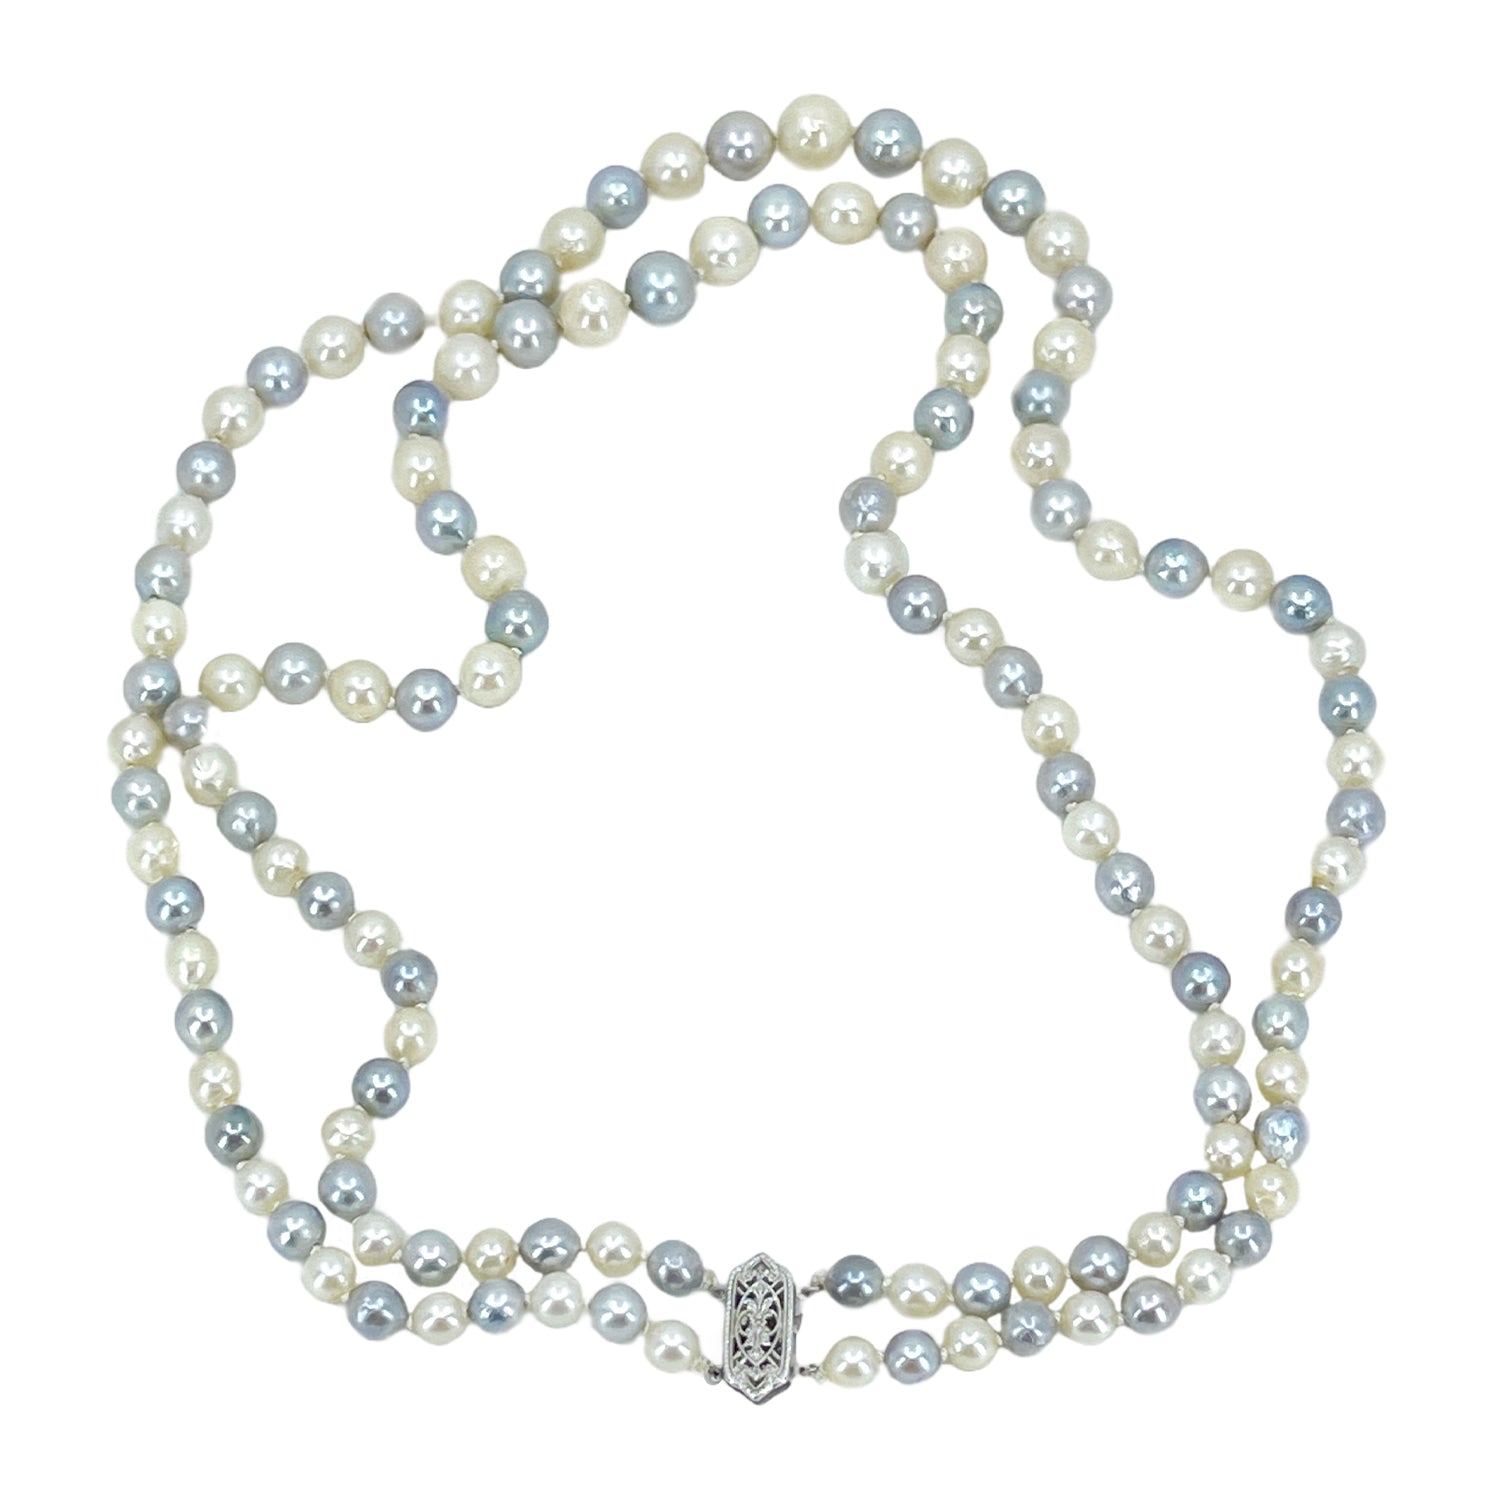 Nouveau Blue & White Baroque Japanese Cultured Akoya Pearl Graduated Double Strand Necklace - 10K White Gold 17.75 & 19 Inch